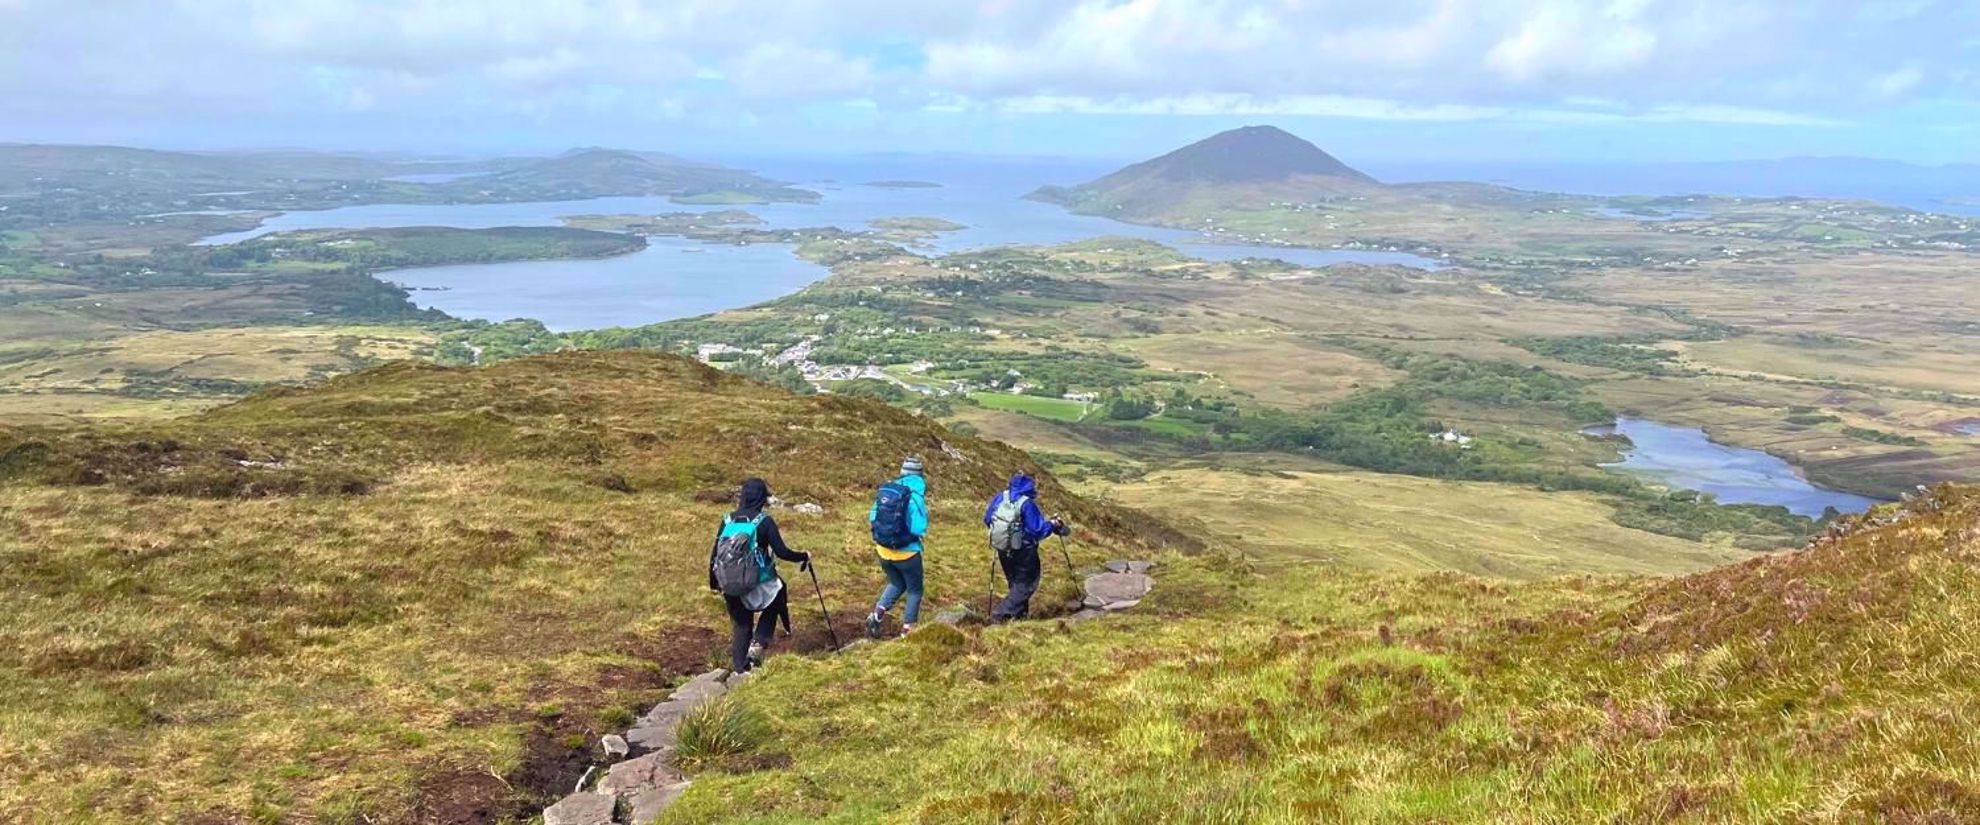 hiking the landscapes of Ireland